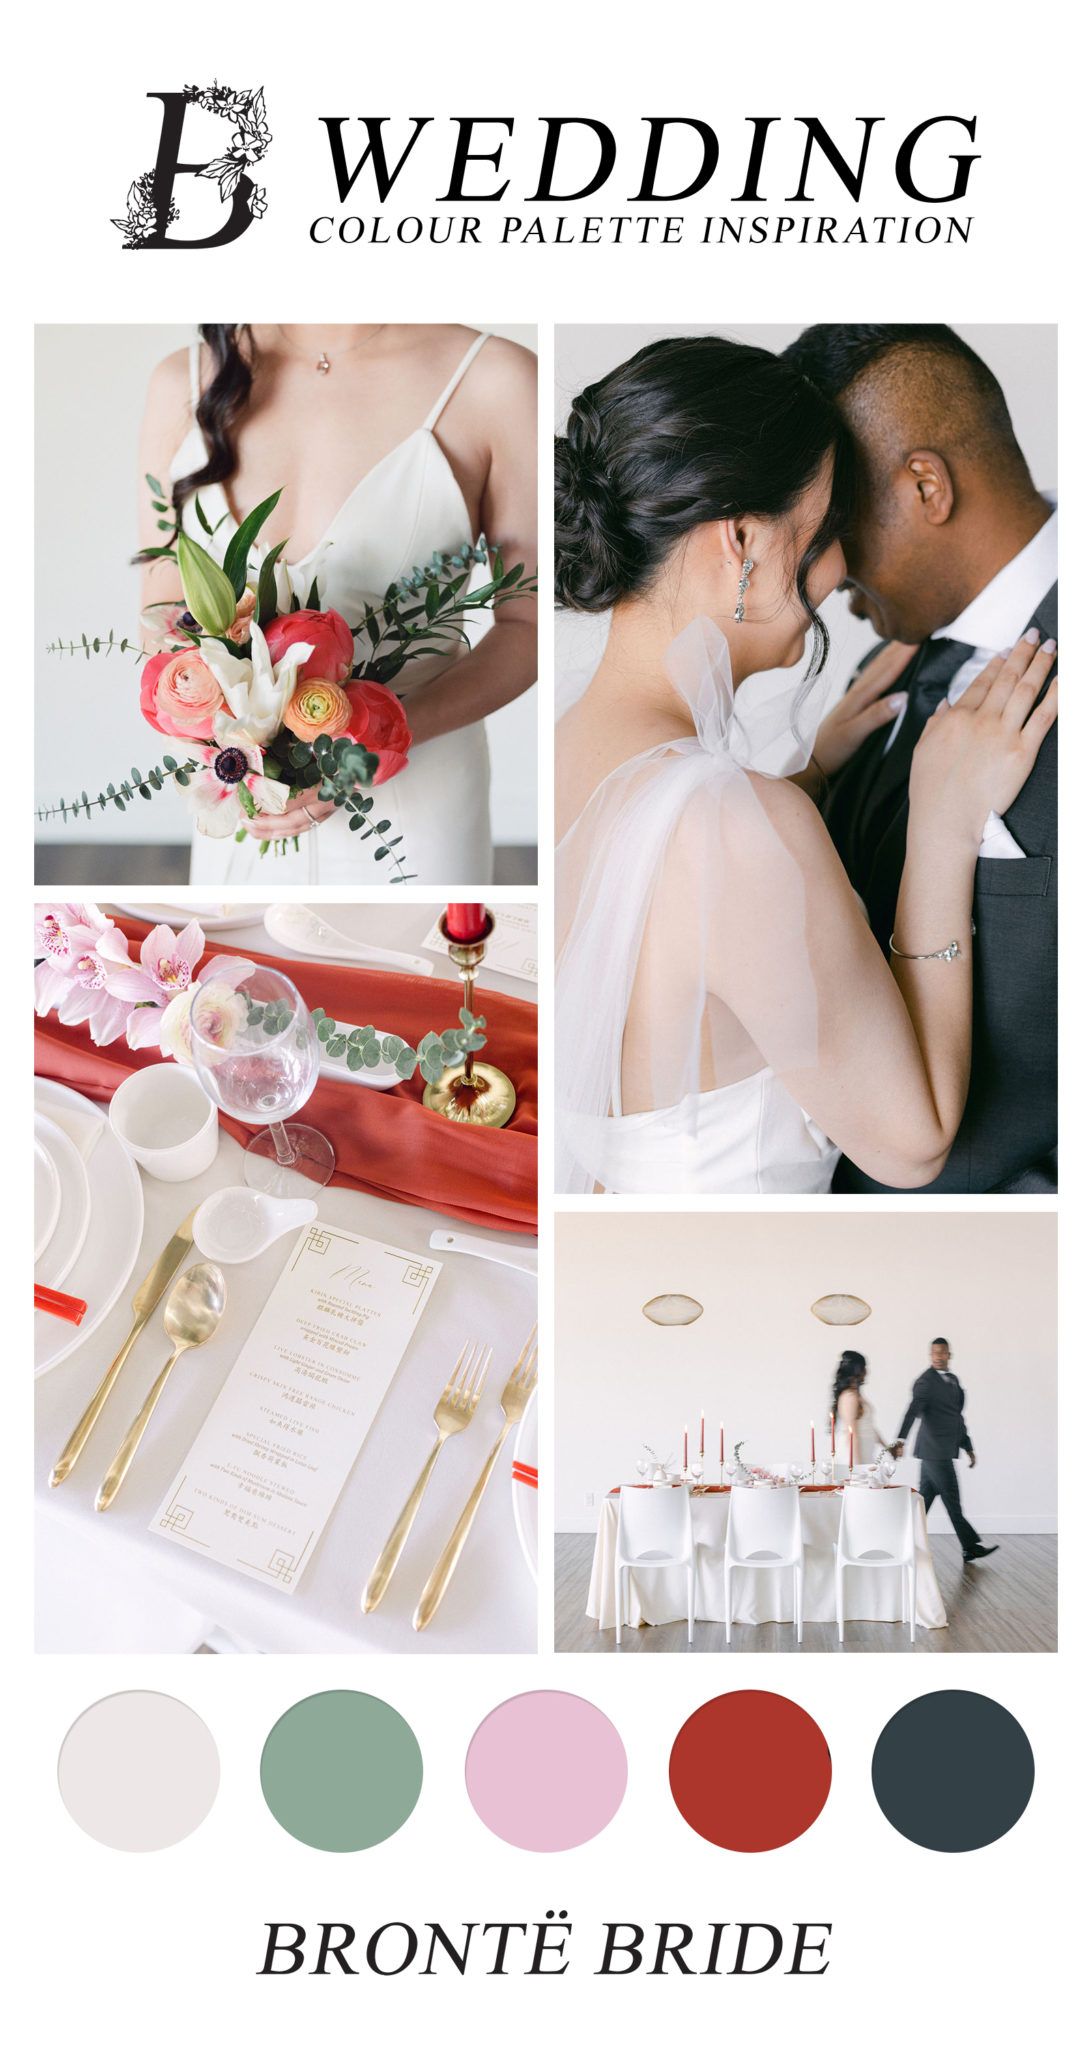 Modern Colour Palette Inspiration - Asian Wedding Traditional Tea Ceremony and Modern Decor Elements